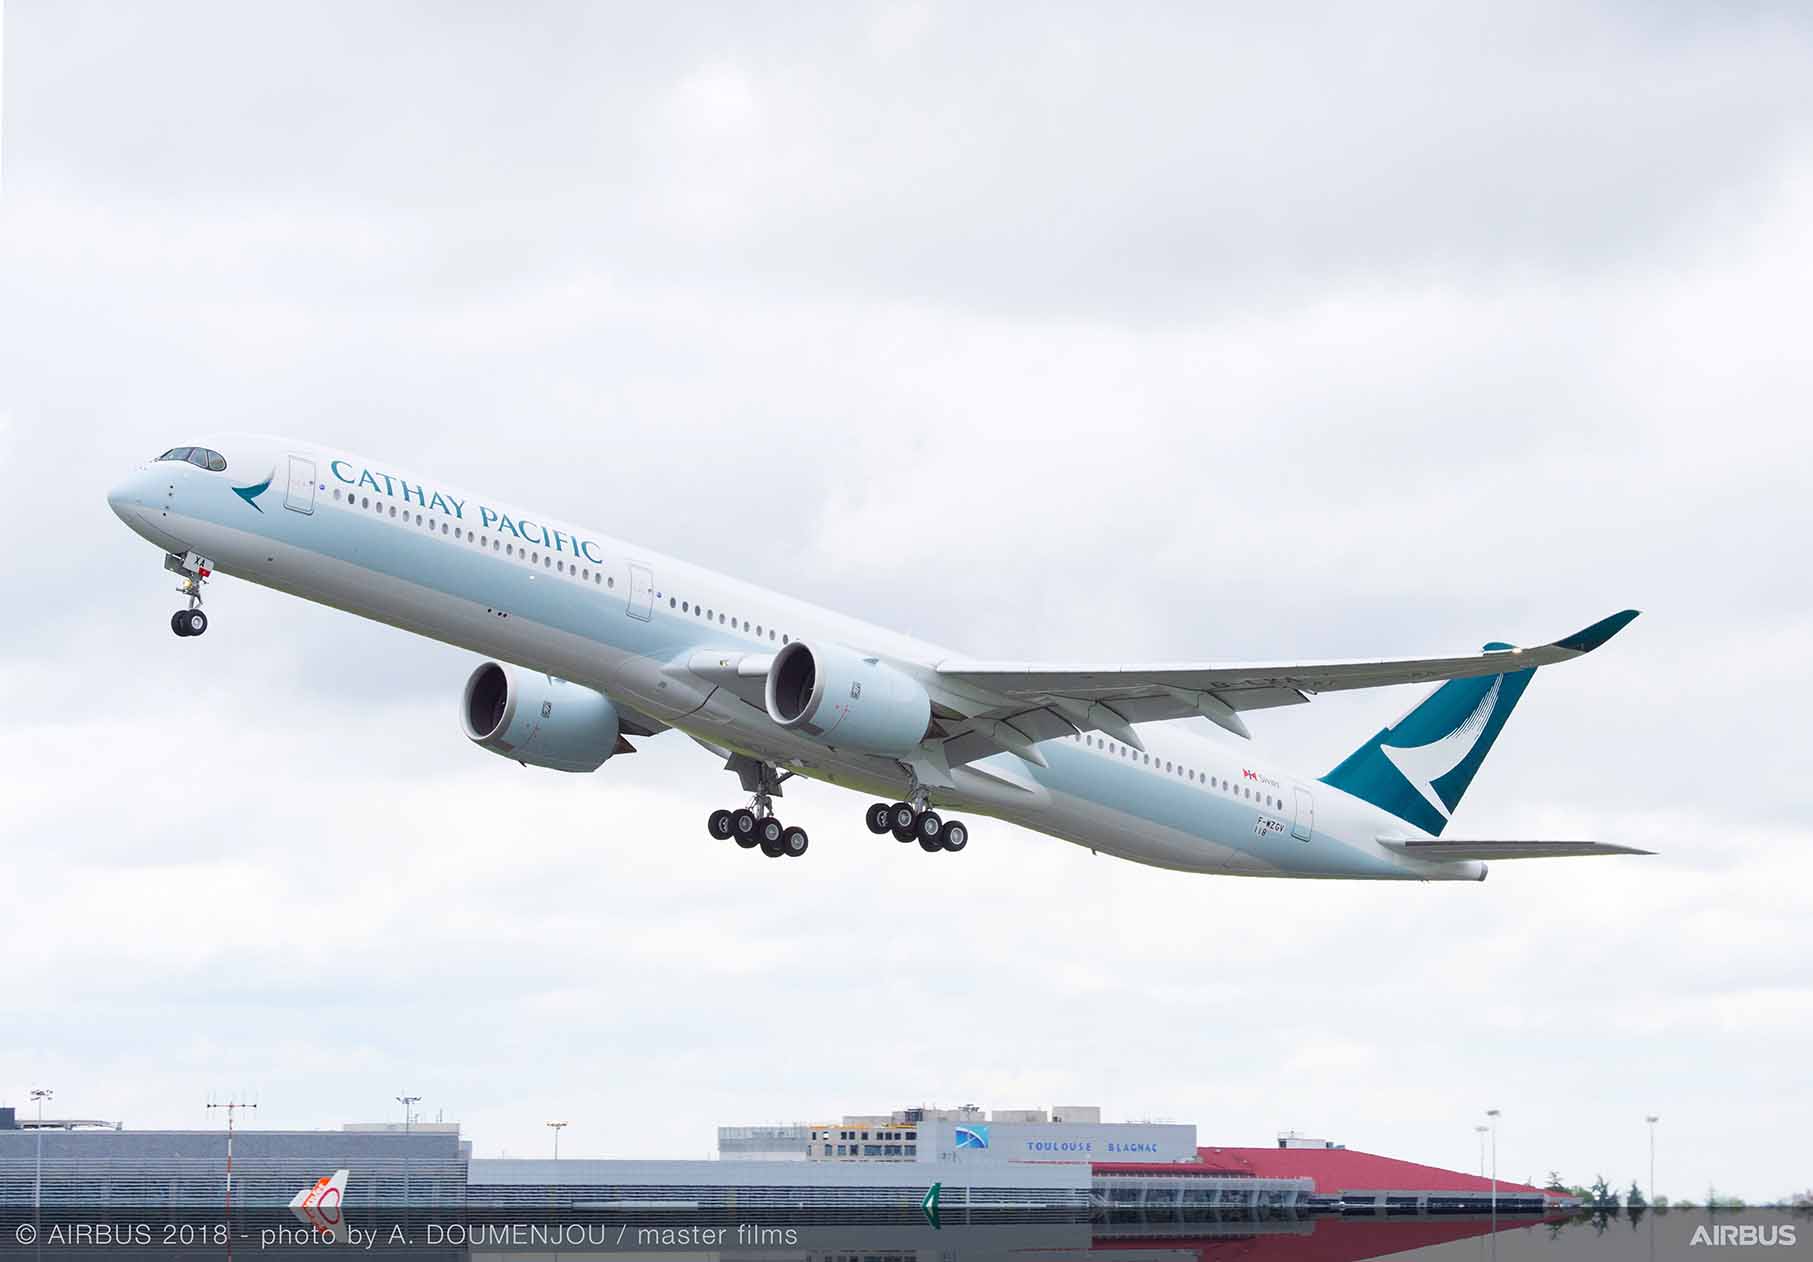 Cathay Pacific doubles flights on Hong Kong-China route as restrictions ease